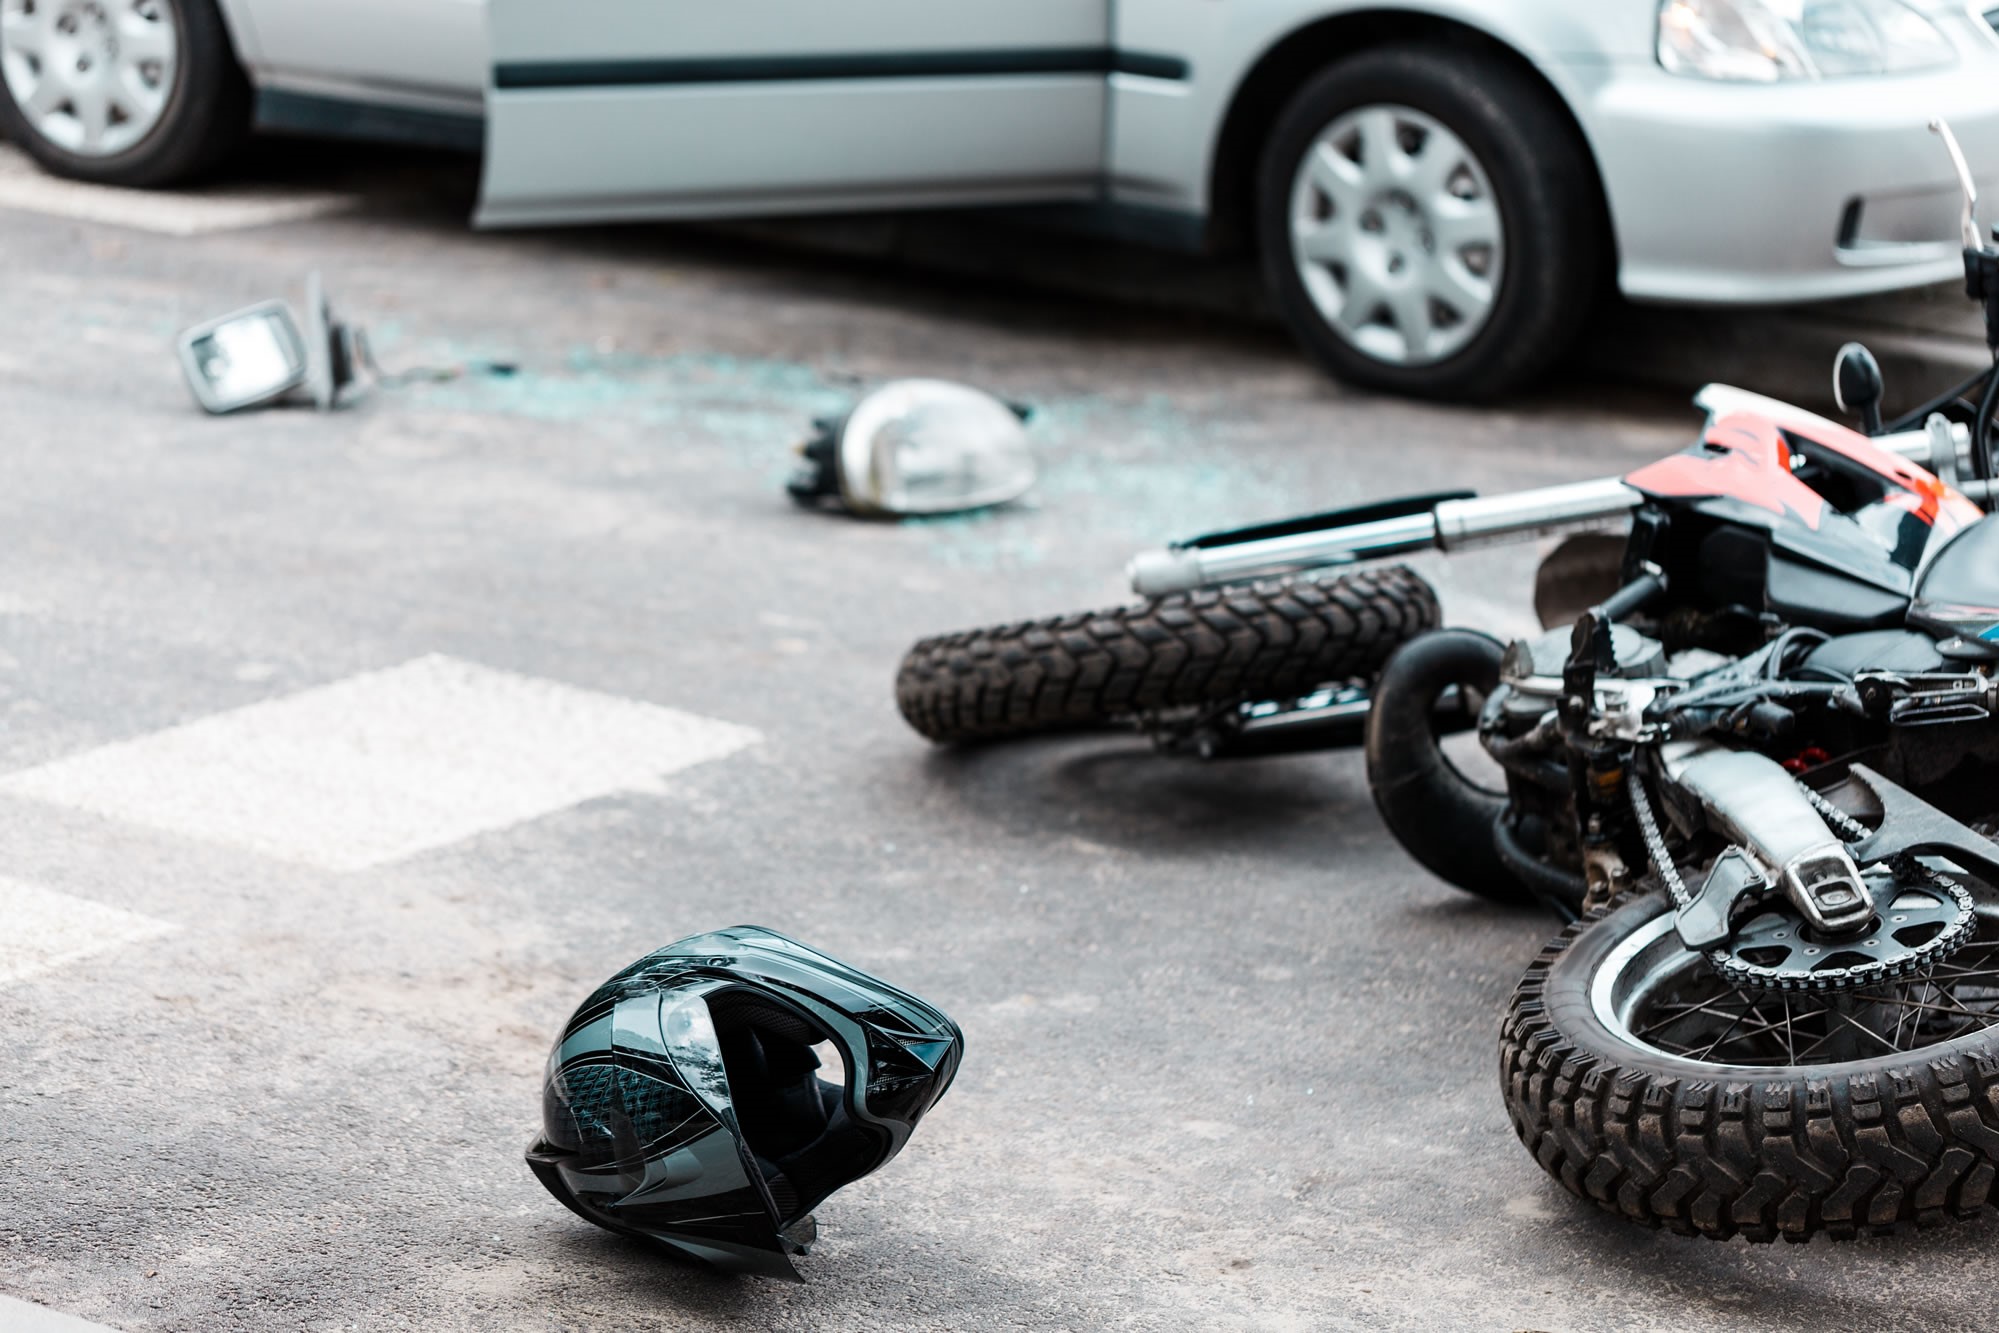 Motorbike, Motorcycle Accident, claims solicitors